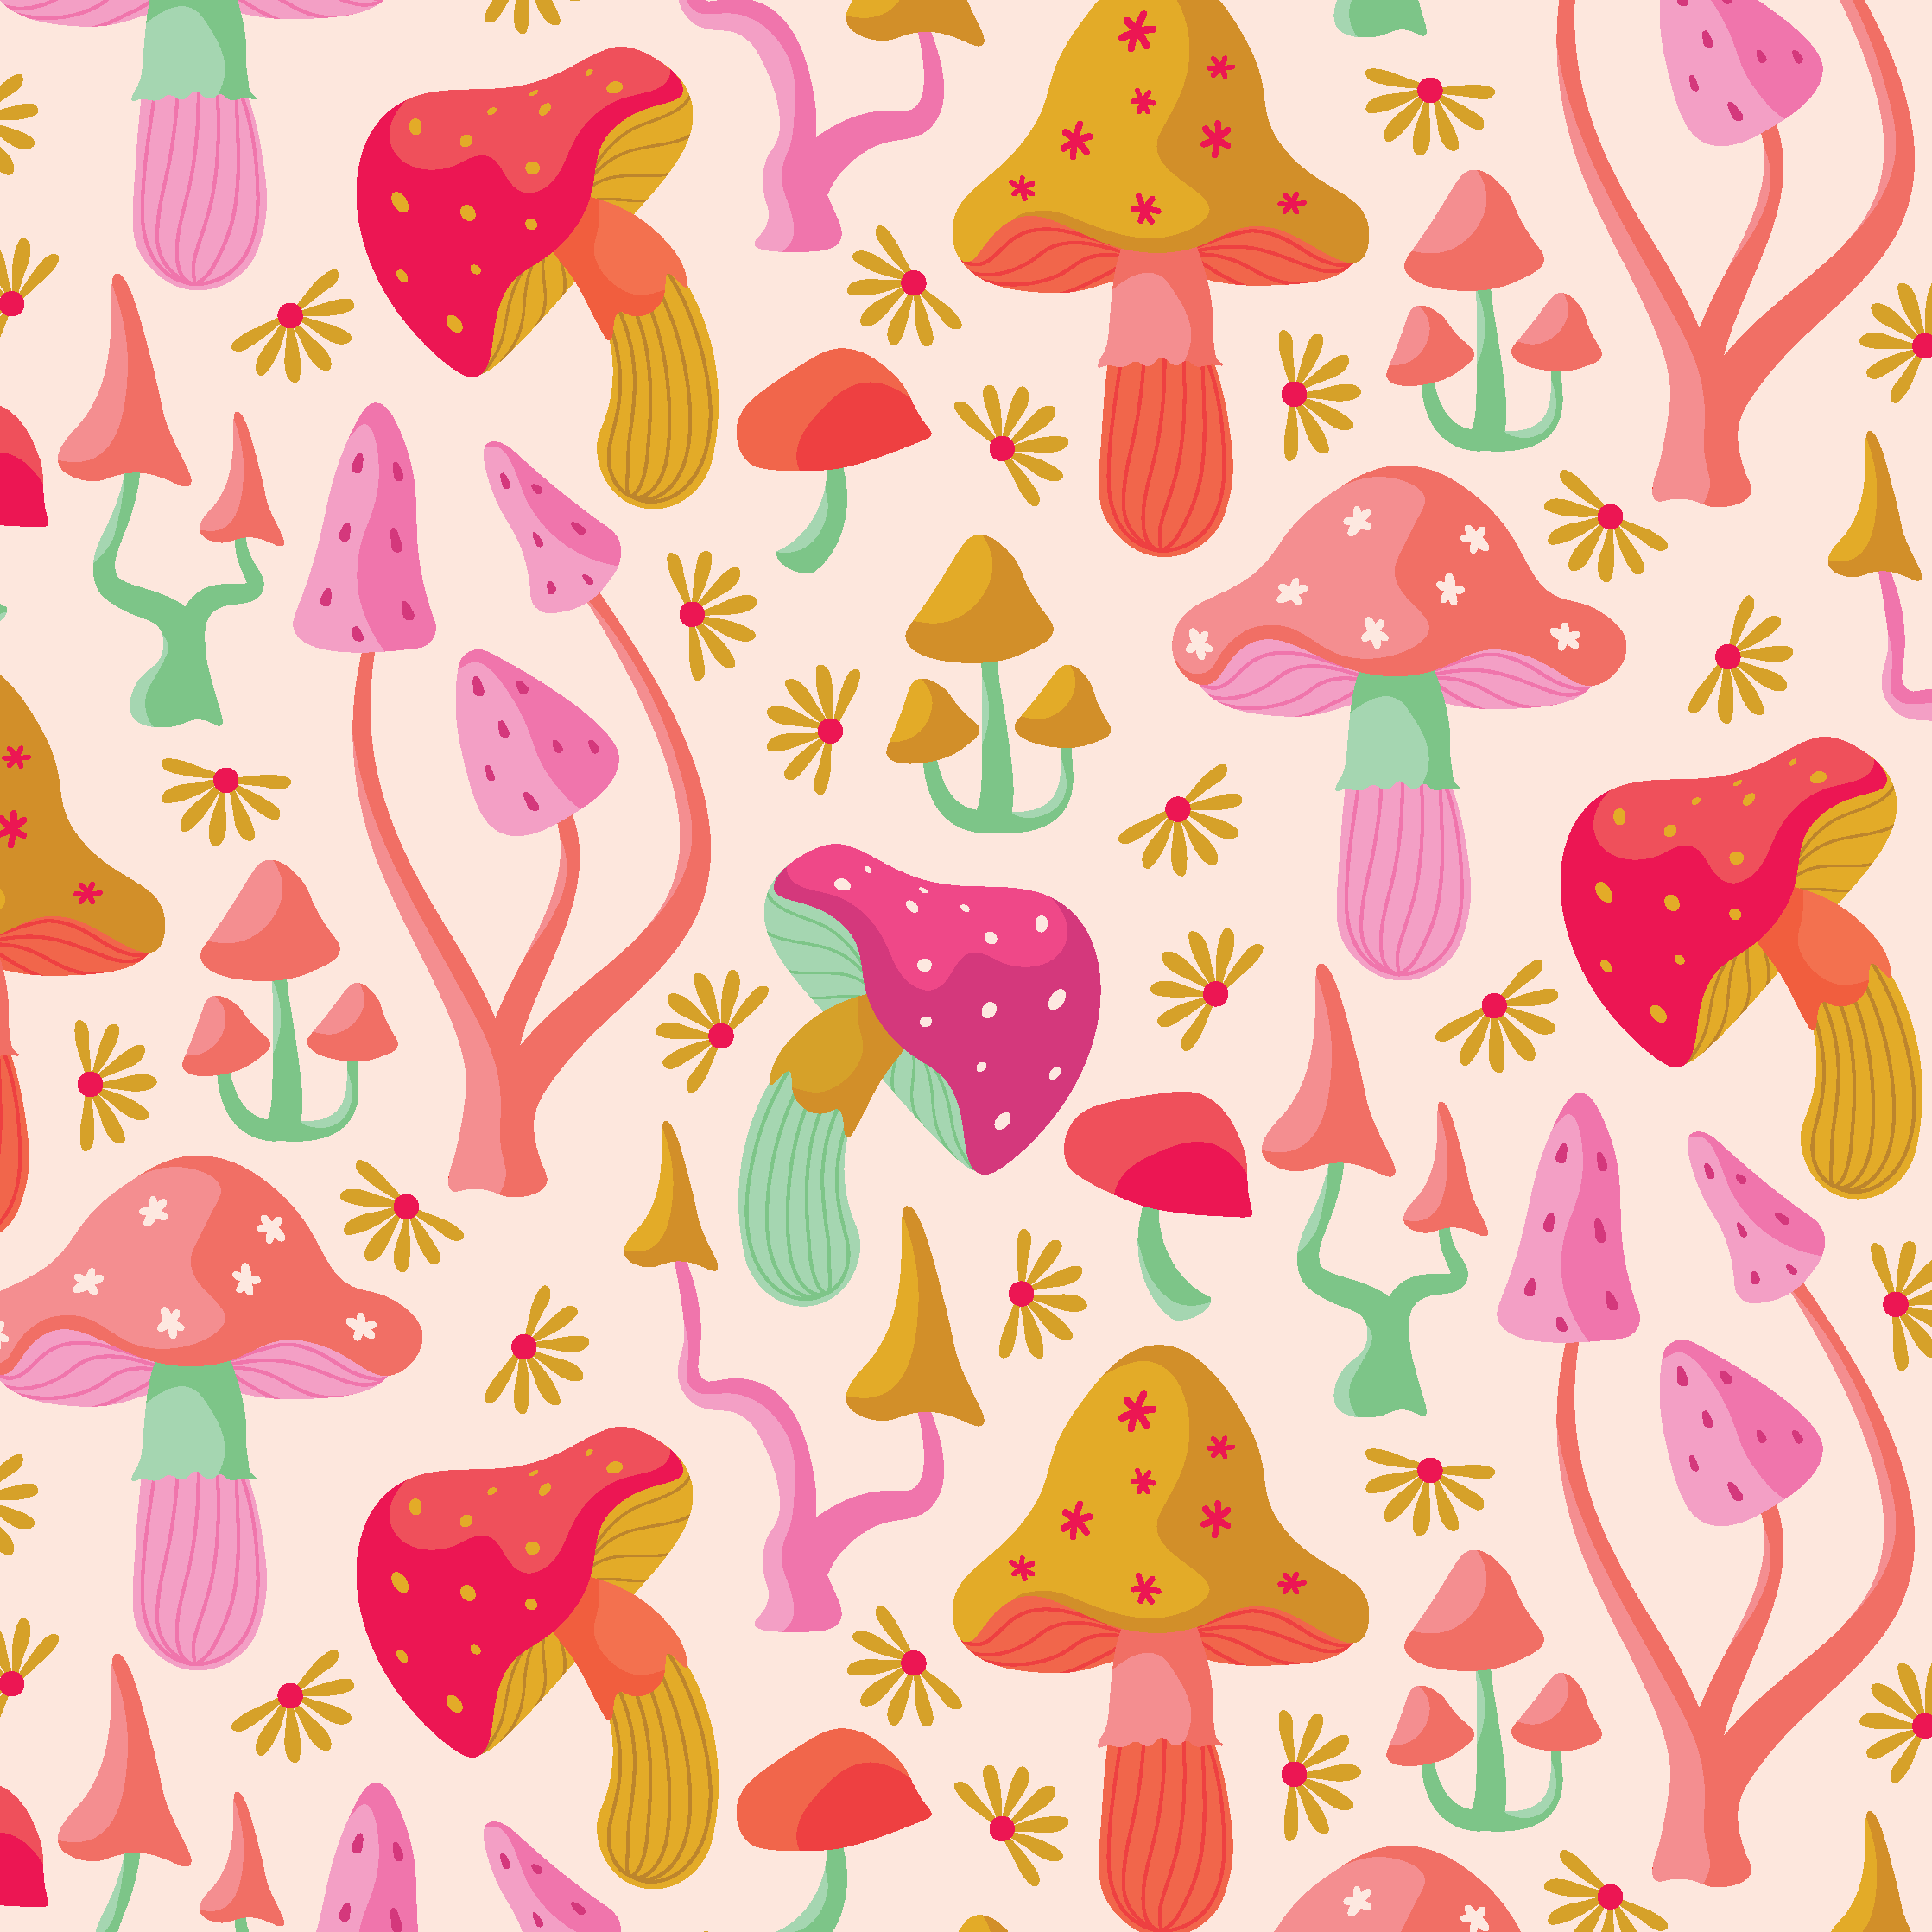 Colorful Dancing Mushrooms Pattern by Elivera Designs